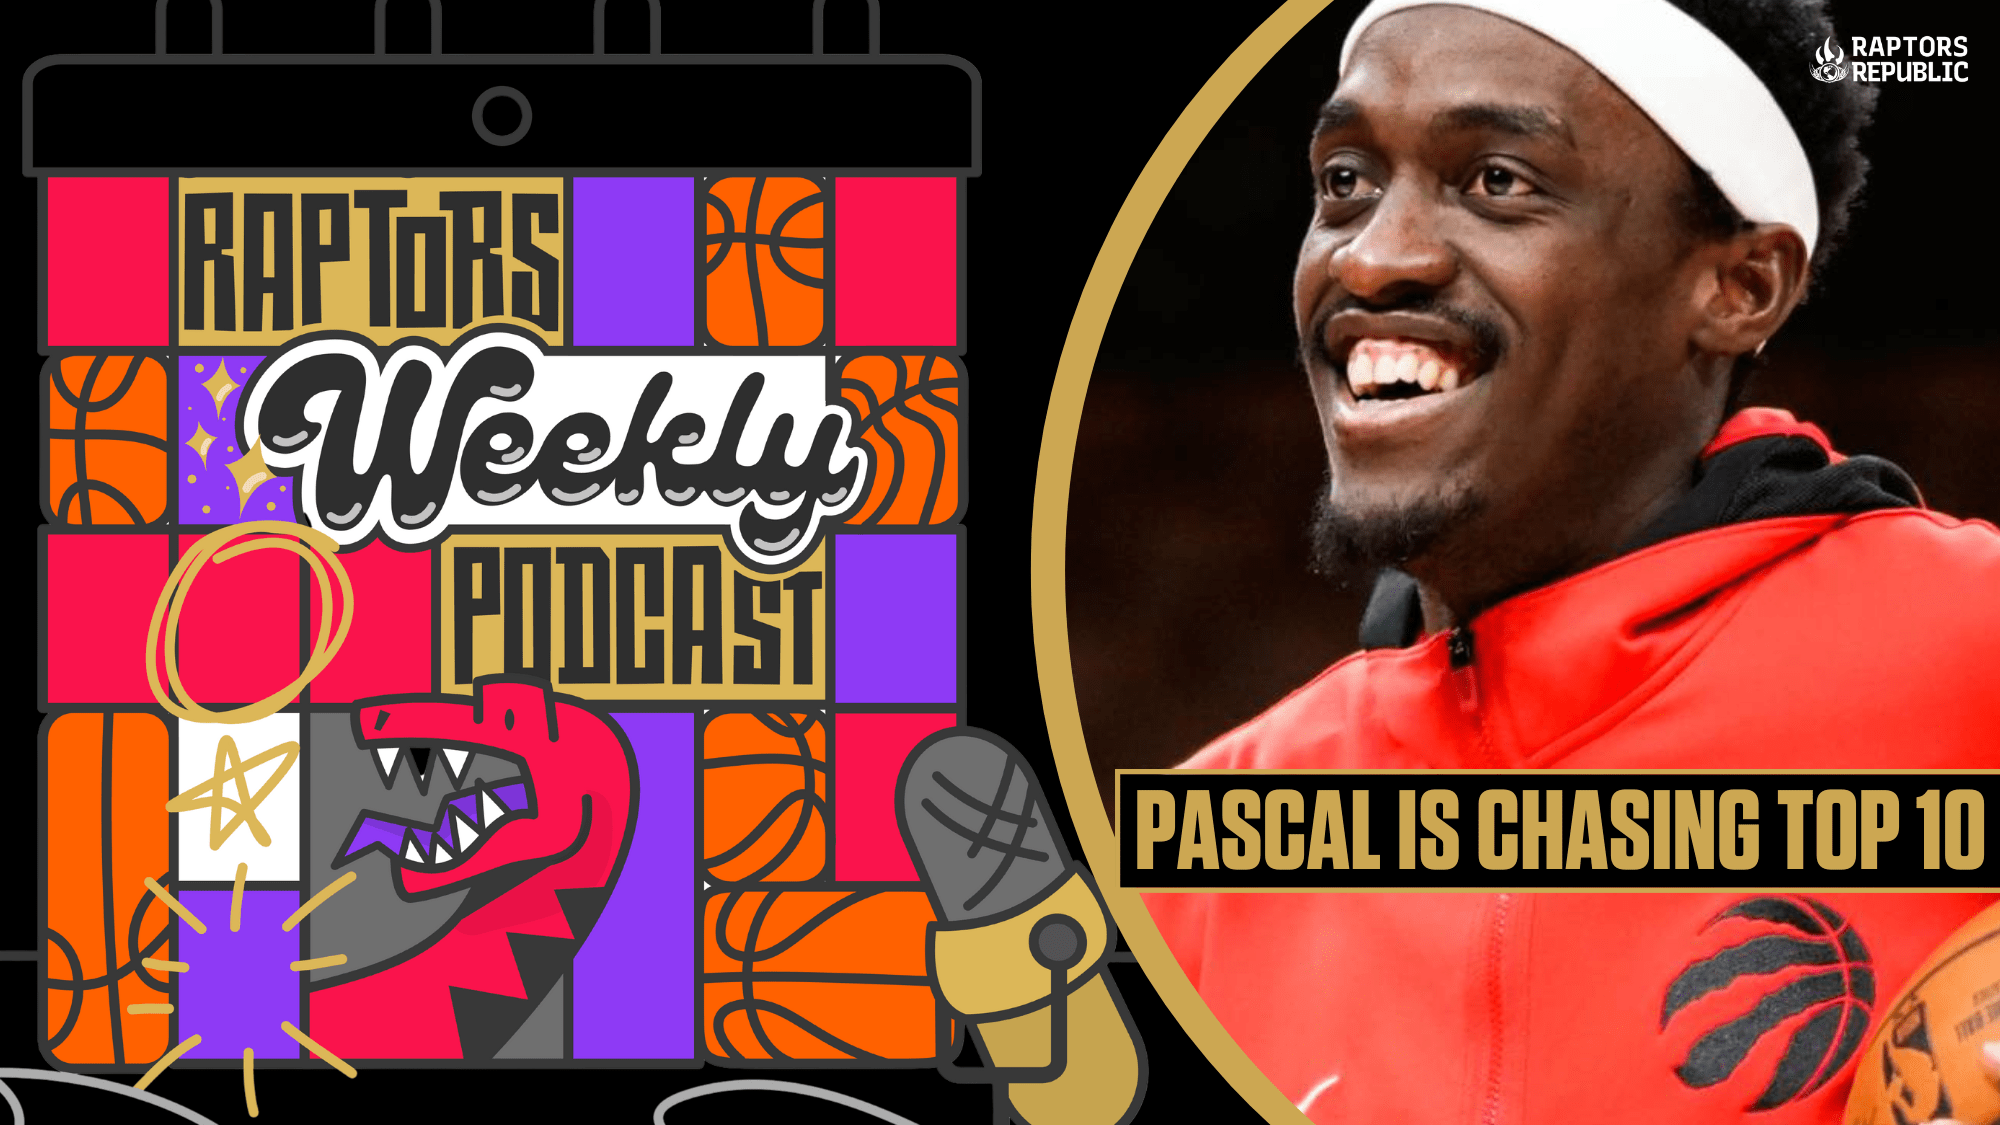 Pascal’s stardom and looking for creation – Raptors Weekly Podcast